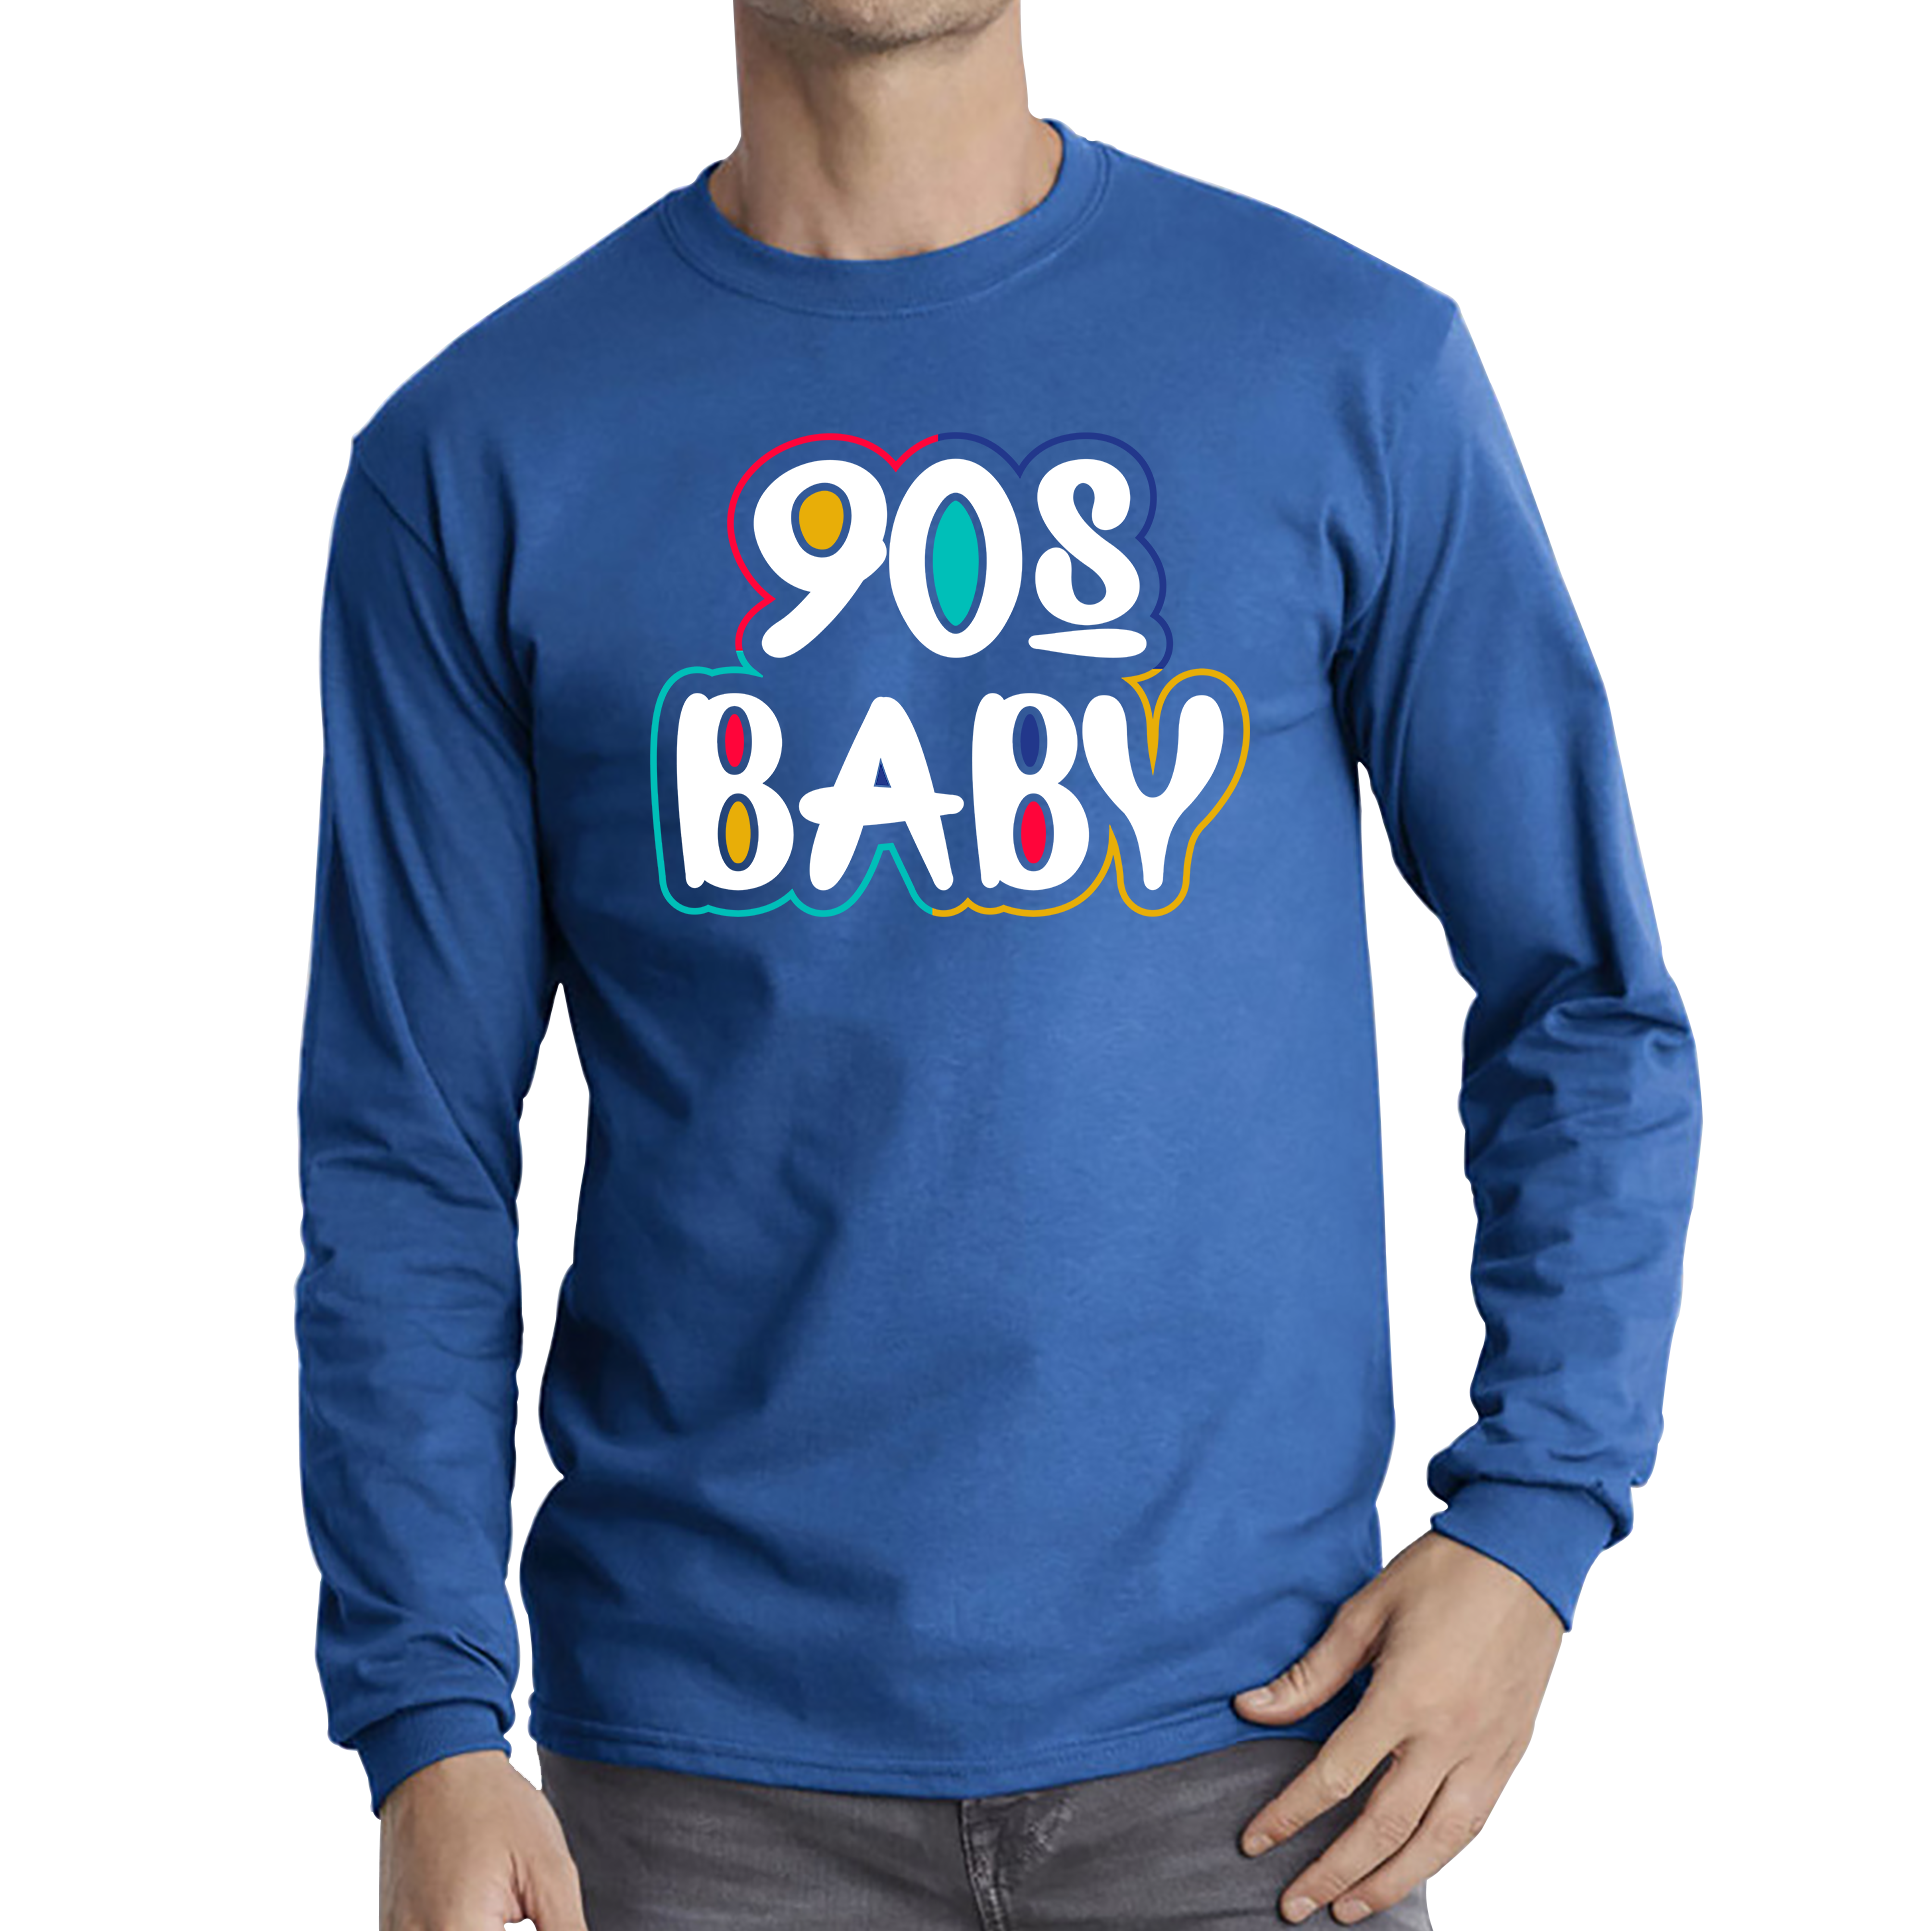 90s Baby Shirt Awesome cool 90's baby fashion Vintag Funny Joke Novelty Design Long Sleeve T Shirt